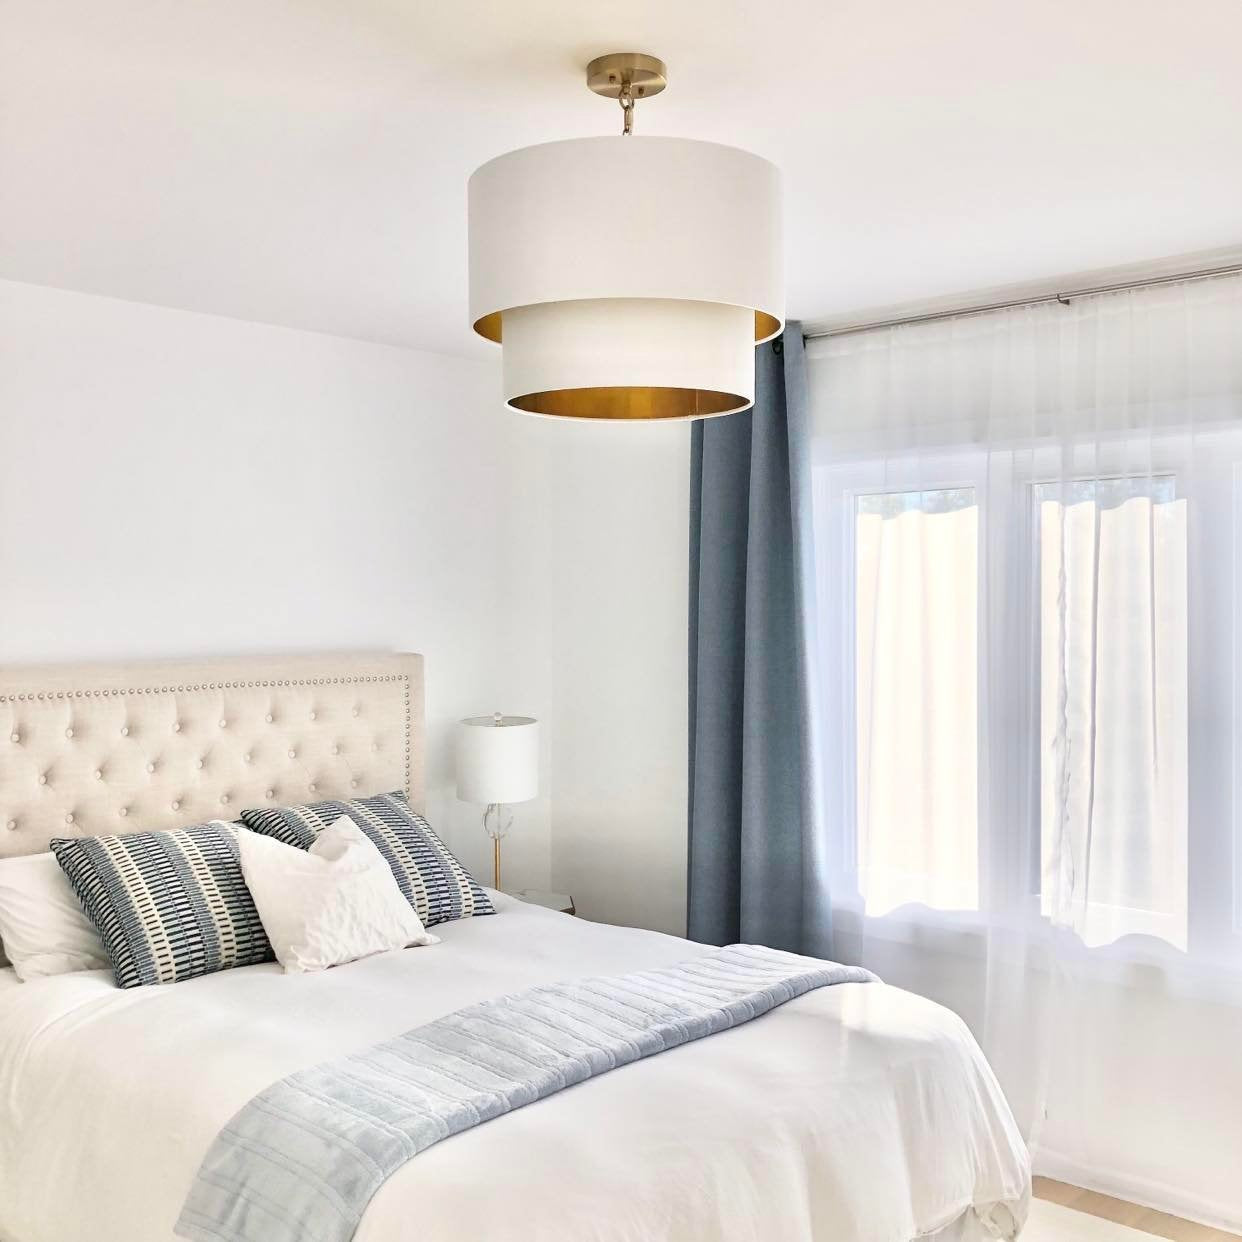 bedroom with white and gold chandelier, white light fixture, bedroom light fixture, white ceiling light, bedroom lighting